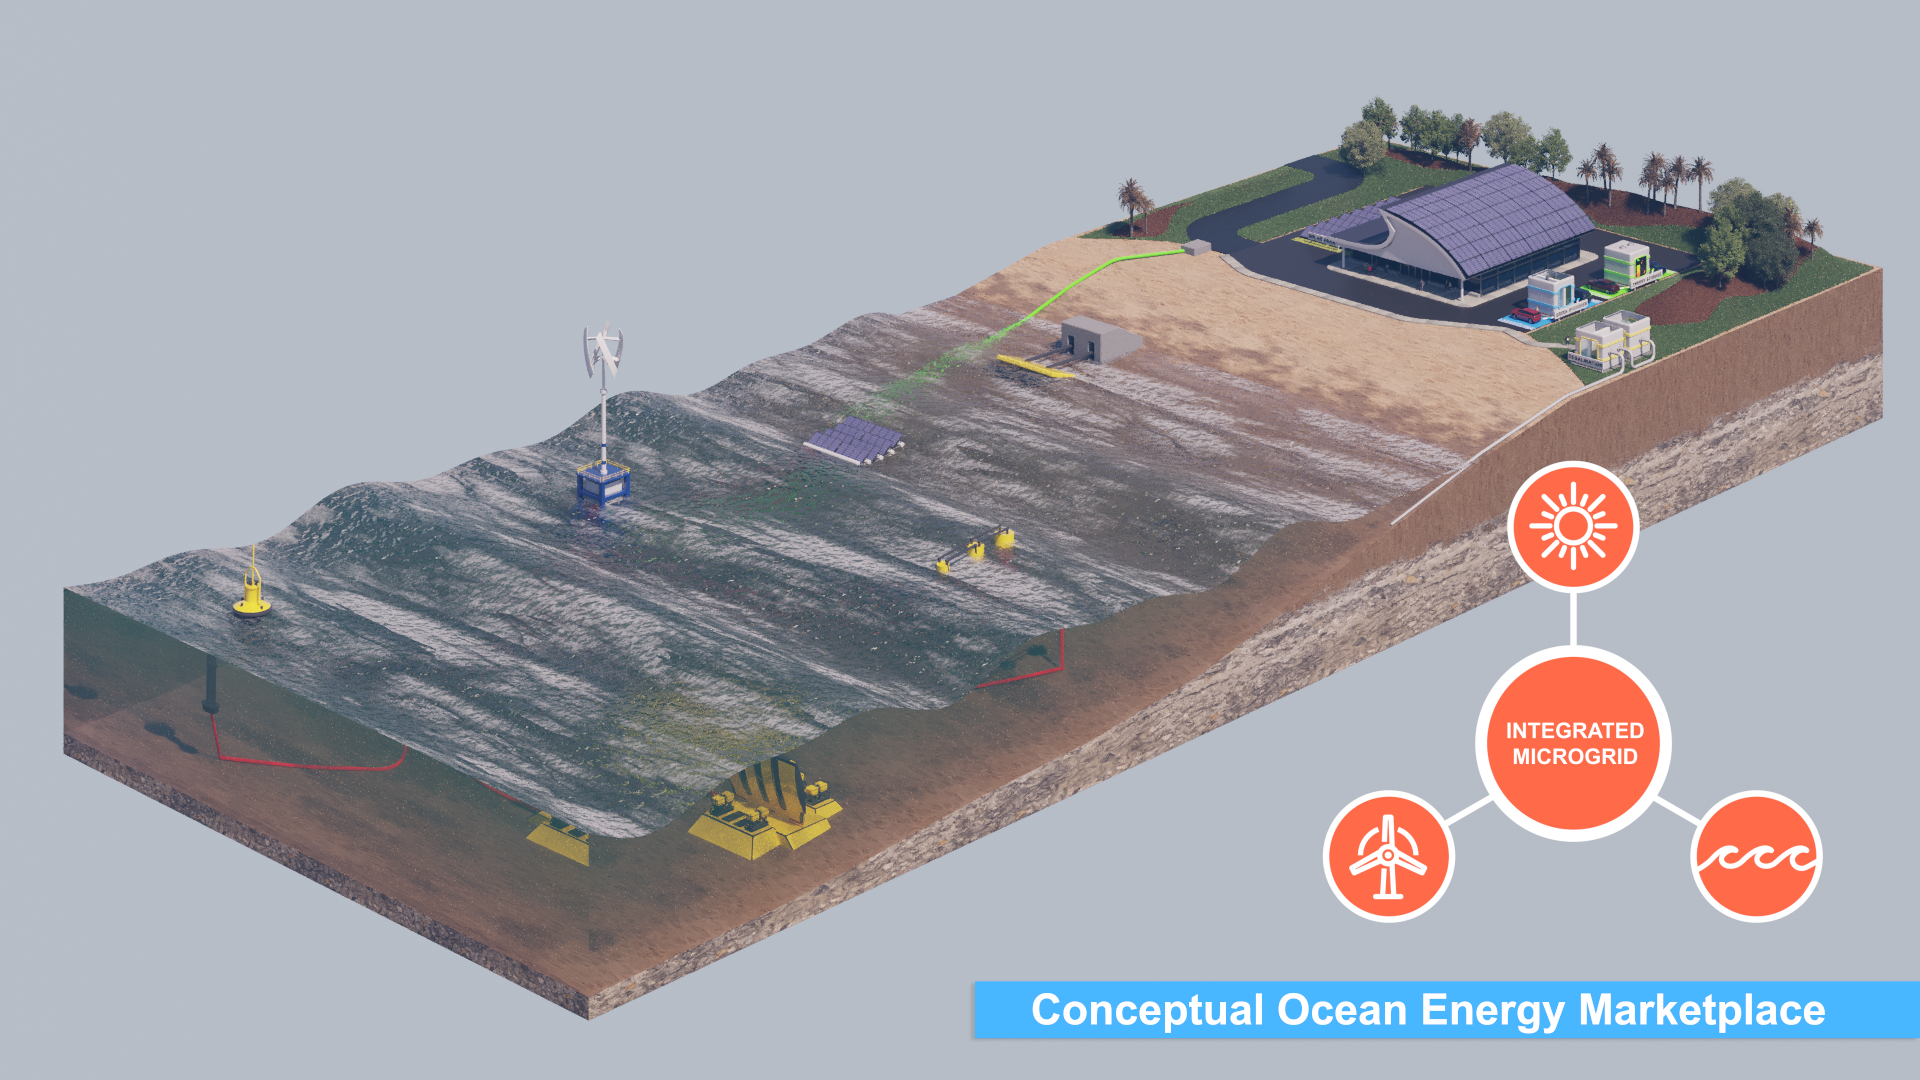 A diagram showing an integrated system of ocean energy generation technologies